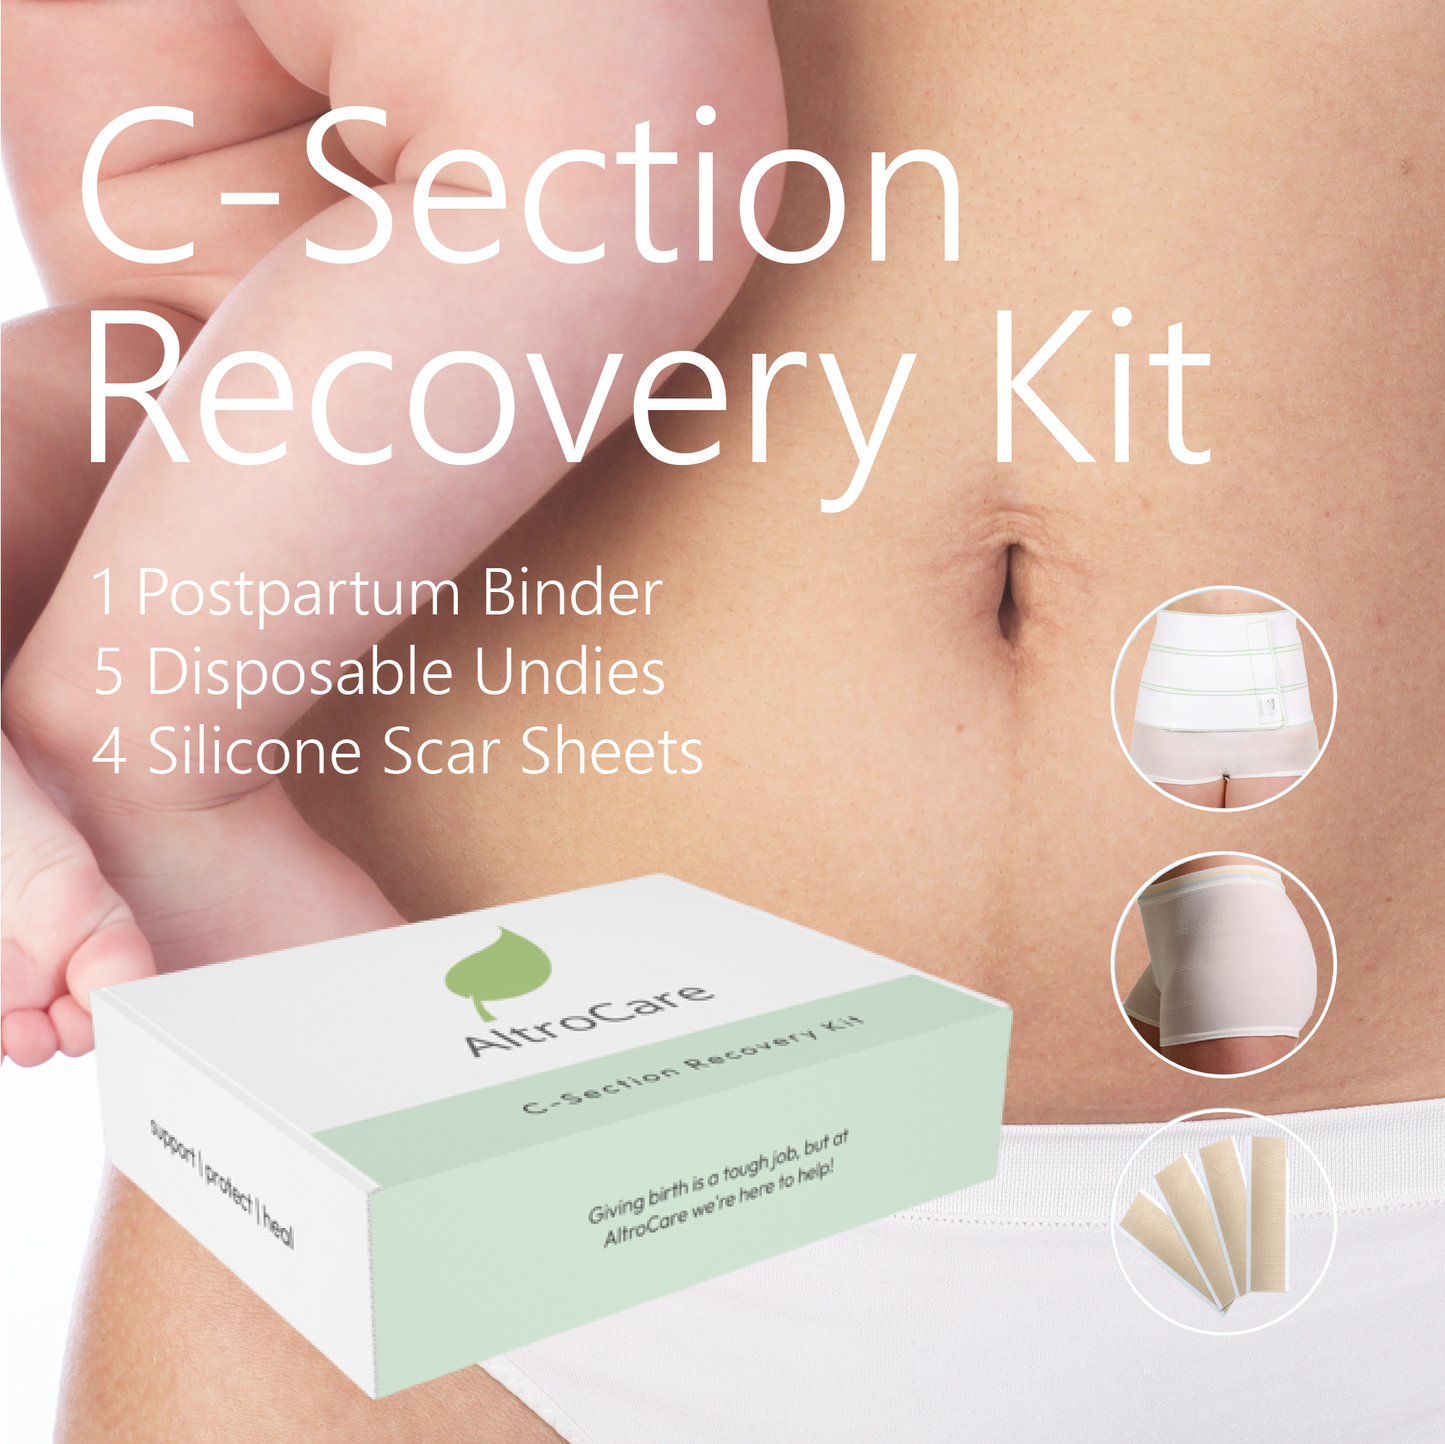 C-Section Recovery Kit – AltroCare